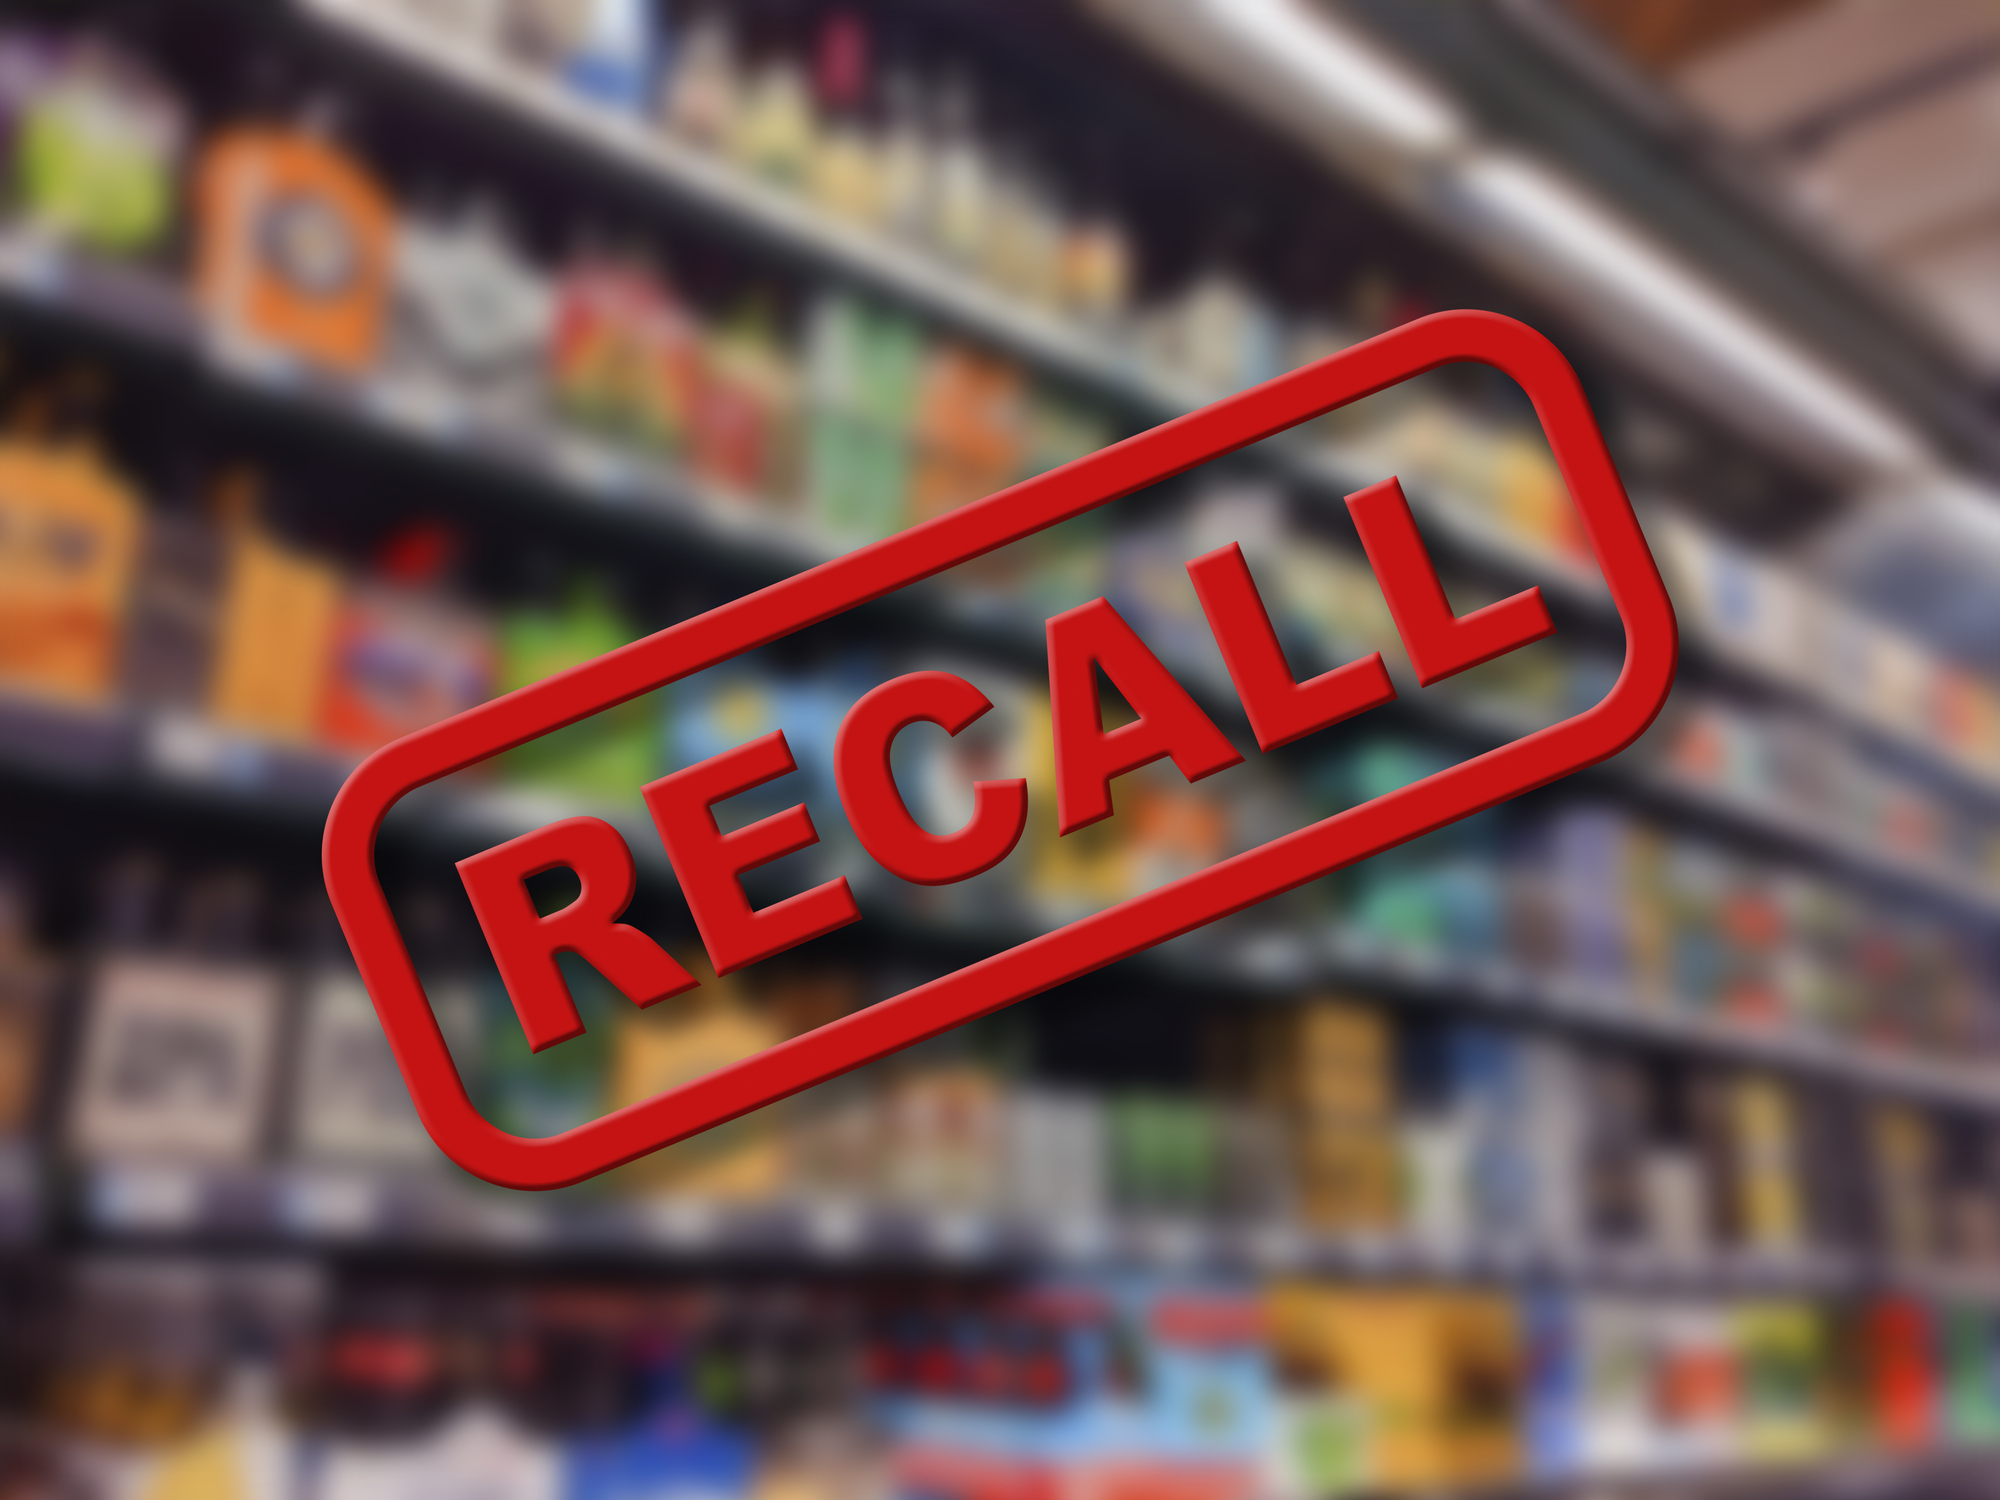 Five Products Recalled This Week Clorox, Nestlé and More